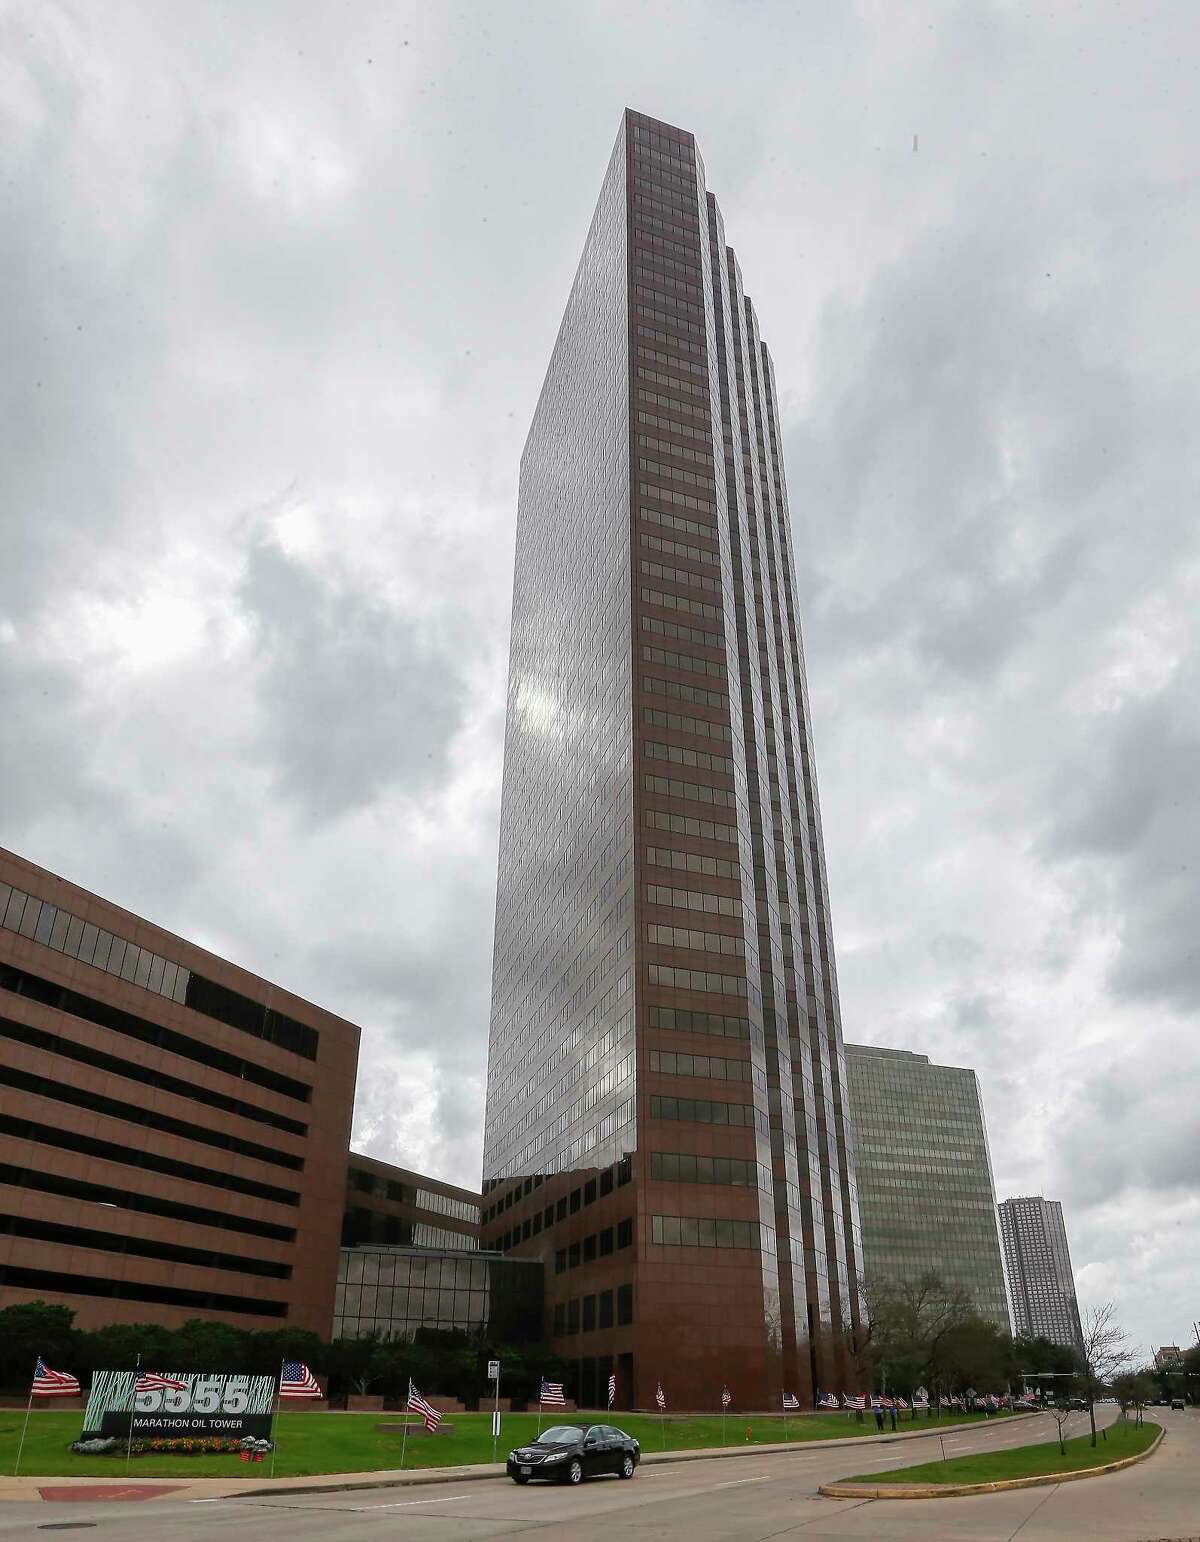 M-M Properties recently acquired the 41-story Marathon Oil Tower at 5555 San Felipe at St. James Place. The sale is a positive sign for Houston's office market, which has weakened in recent years.